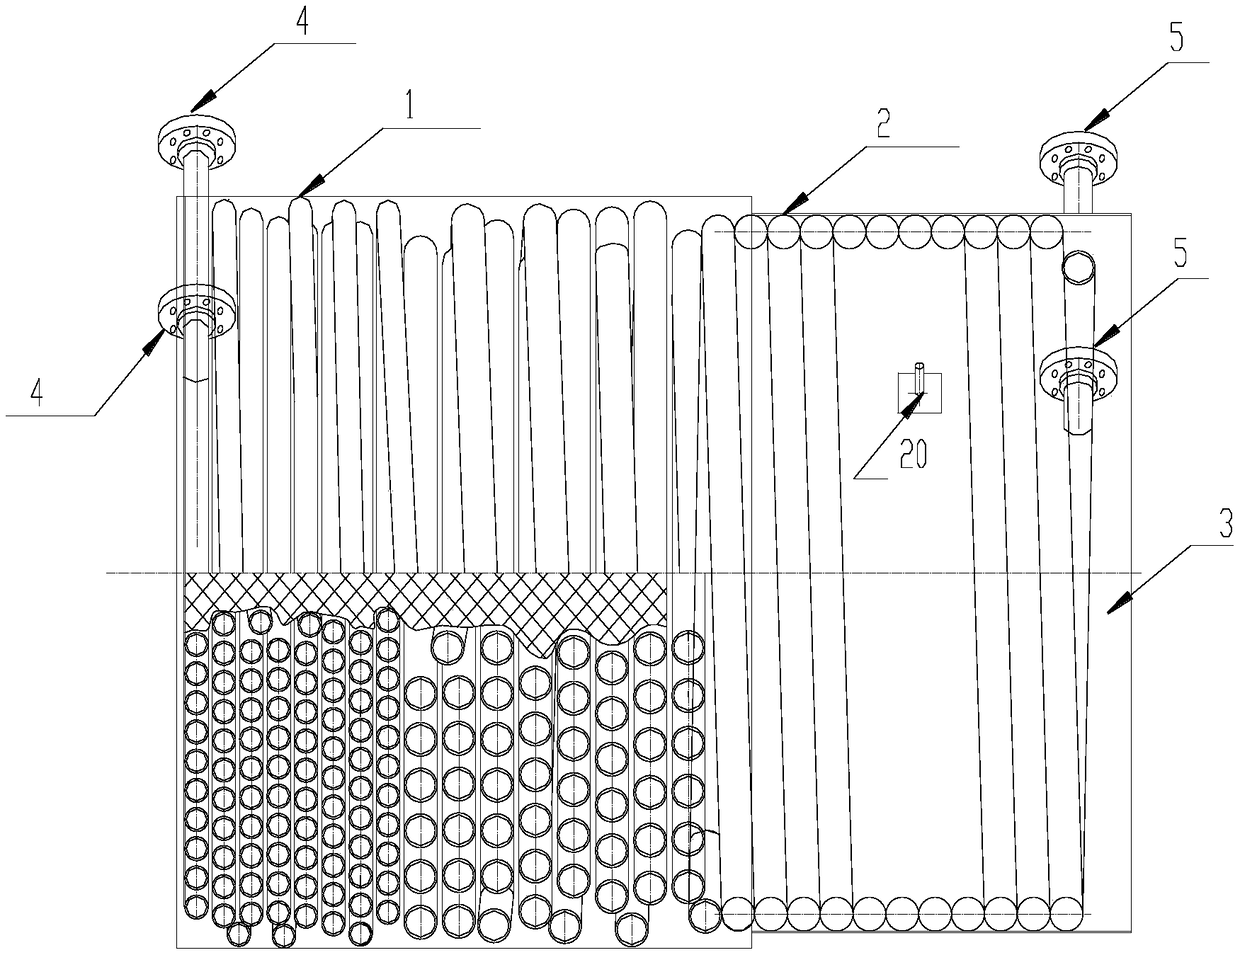 A horizontal side-fired coil structure rapid steam generation system